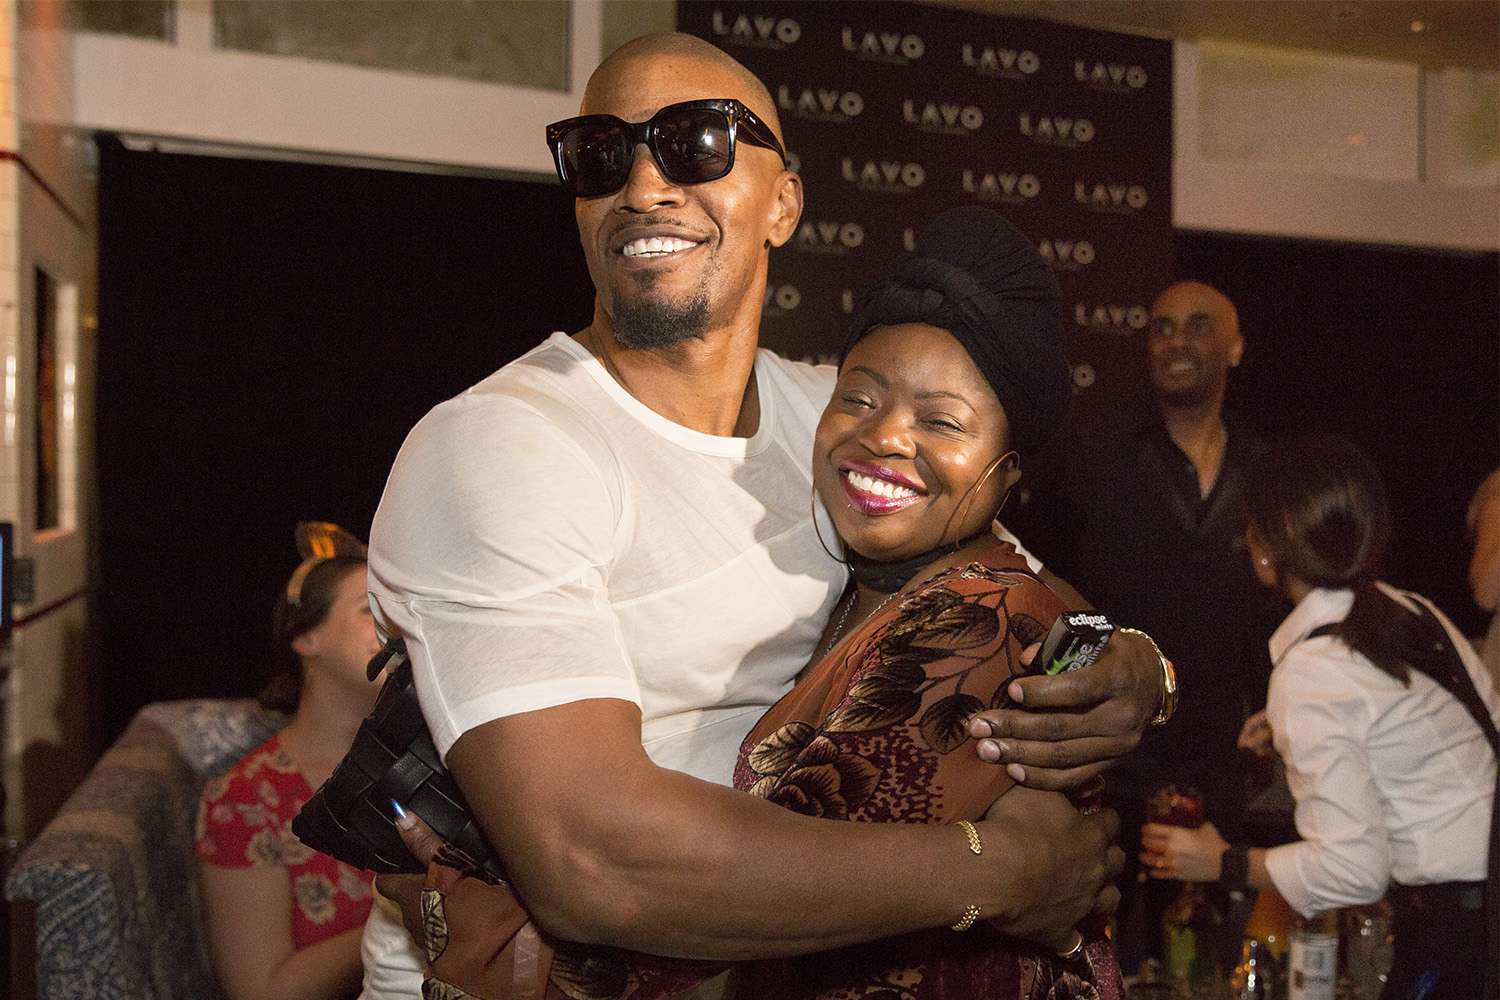 Jamie Foxx Says He Has ‘Real Tears in My Eyes' As He Celebrates His Sister's Birthday: 'You Saved My Life'